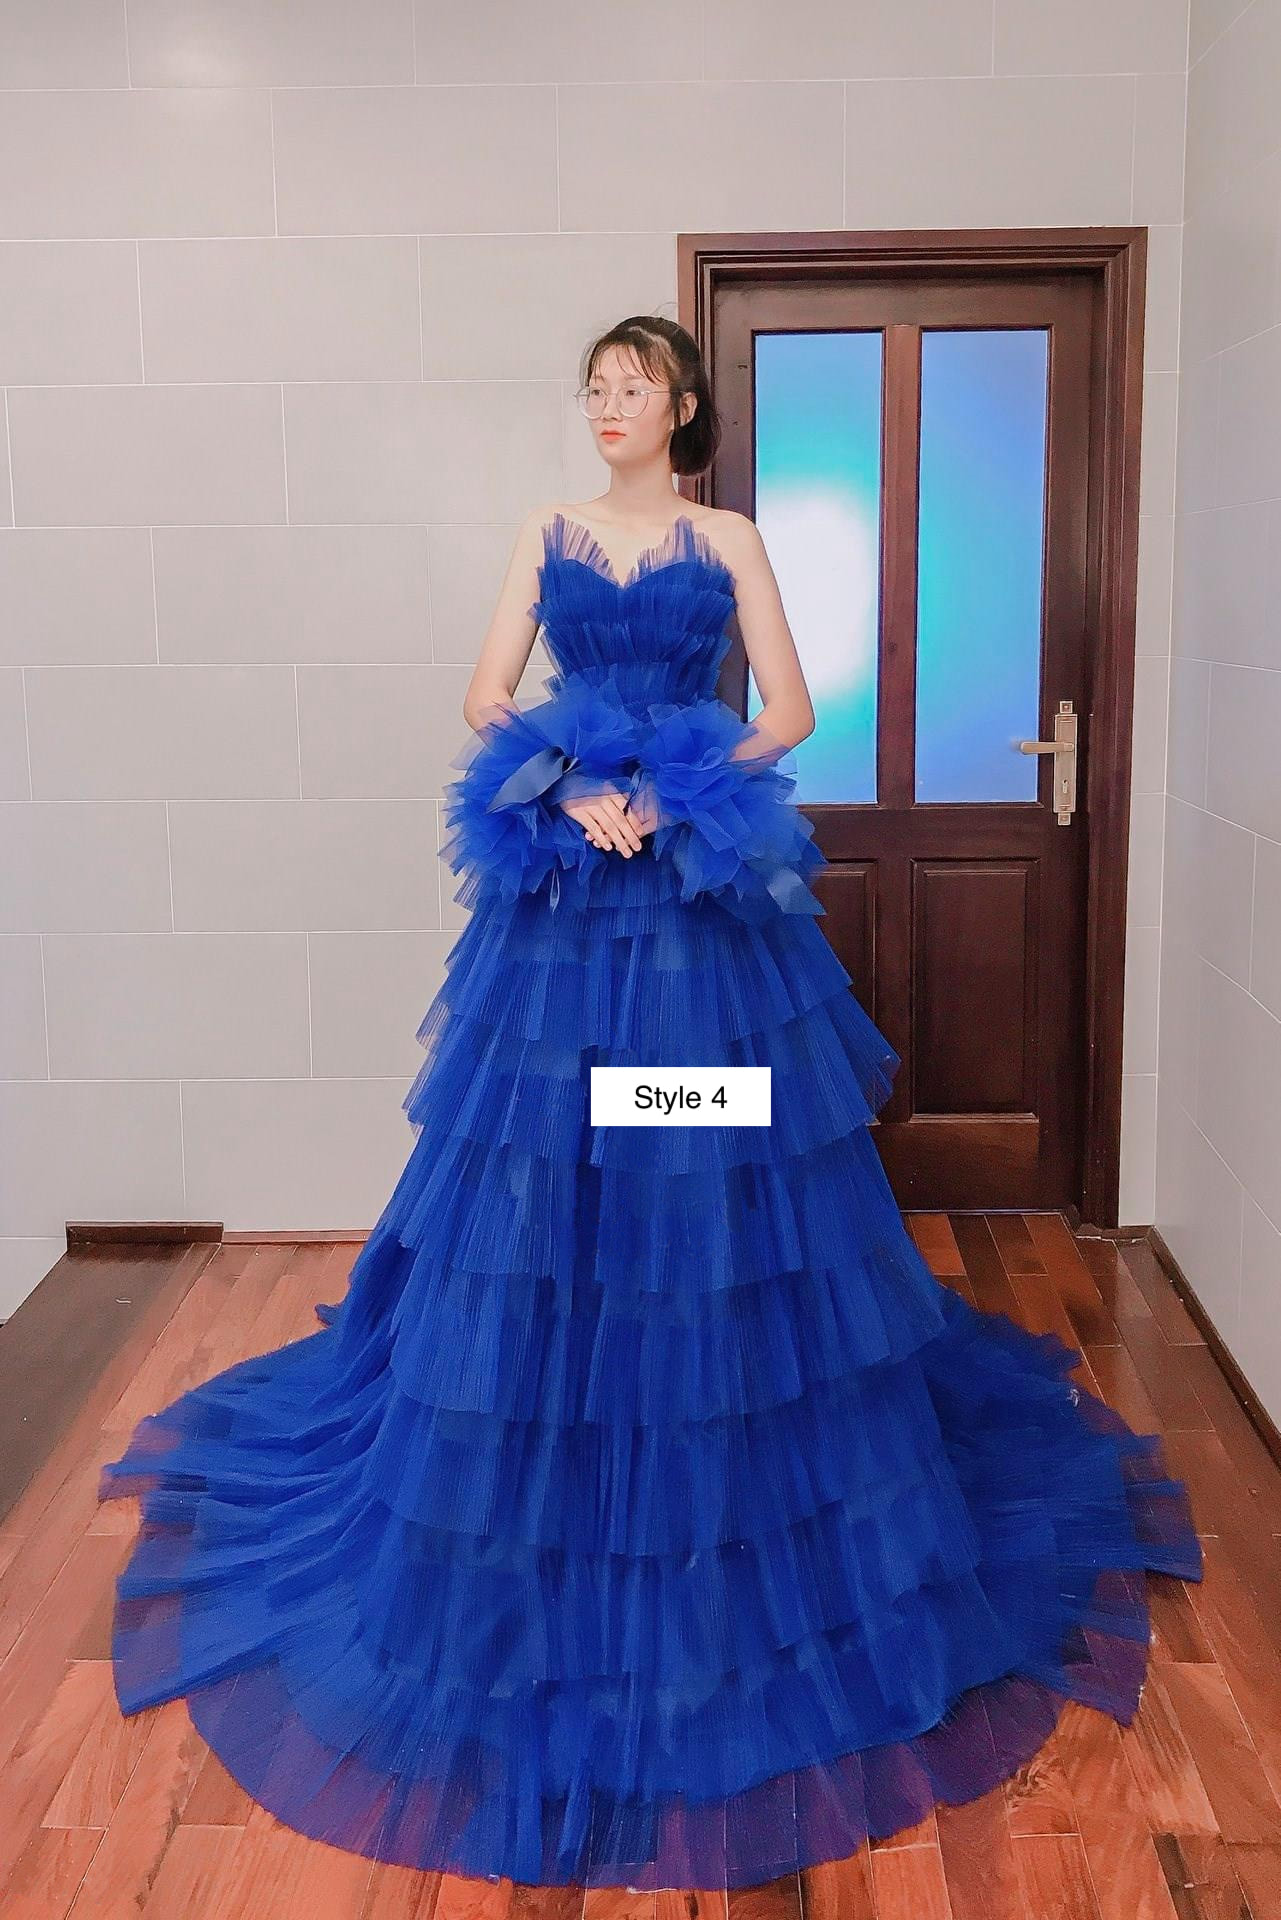 Gorgeous Royal Blue Prom Dress with Flowers Long Sleeveless Evening Dr –  MyChicDress